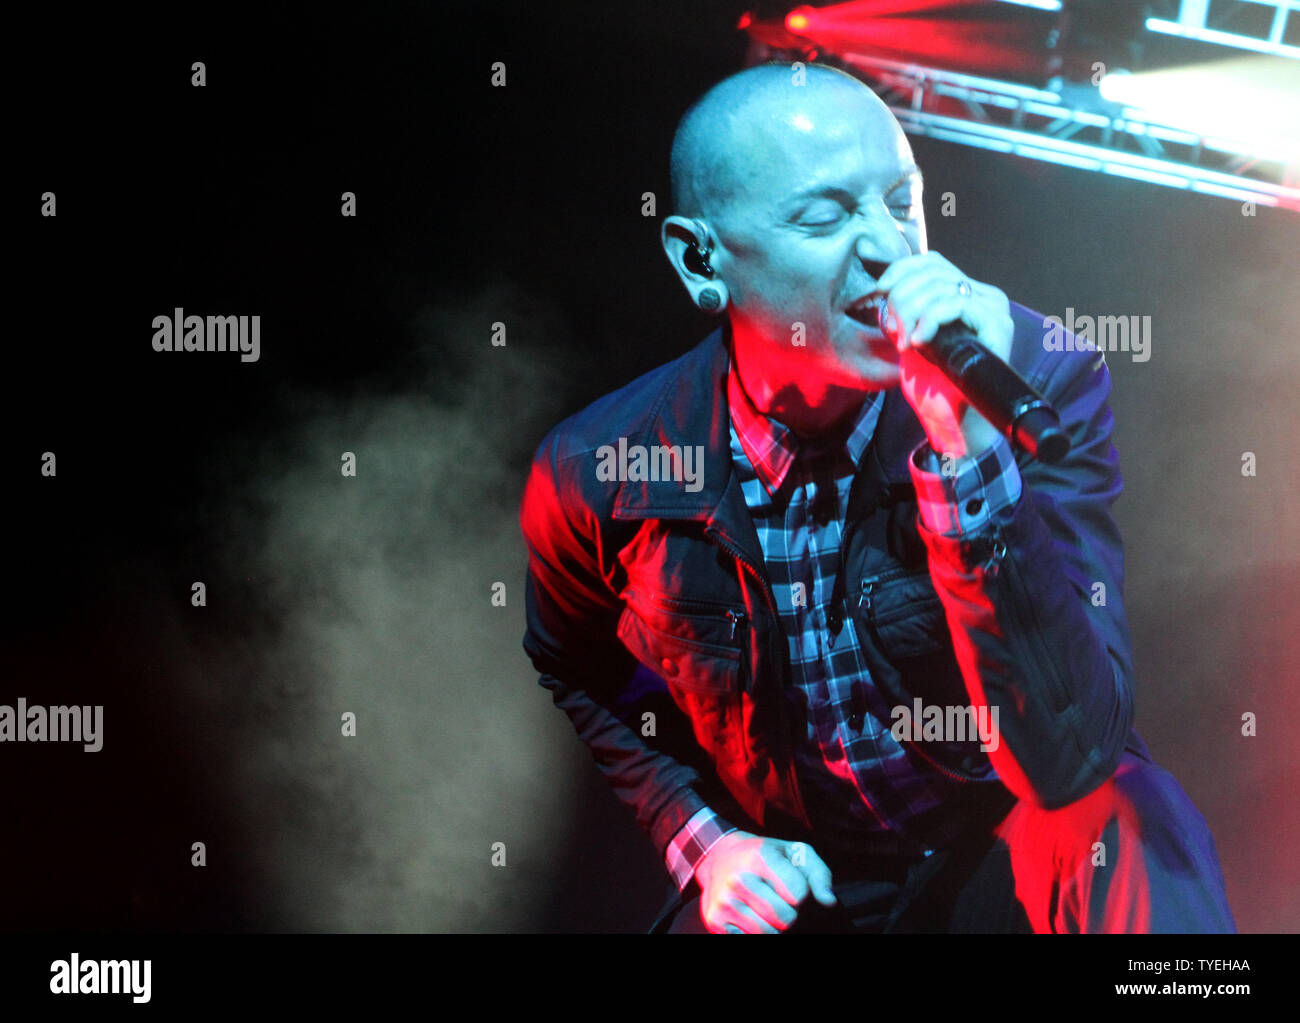 Chester Bennington with Stone Temple Pilots performs at the BB & T Center in Sunrise, Florida on September 17, 2013.  UPI/Michael Bush Stock Photo